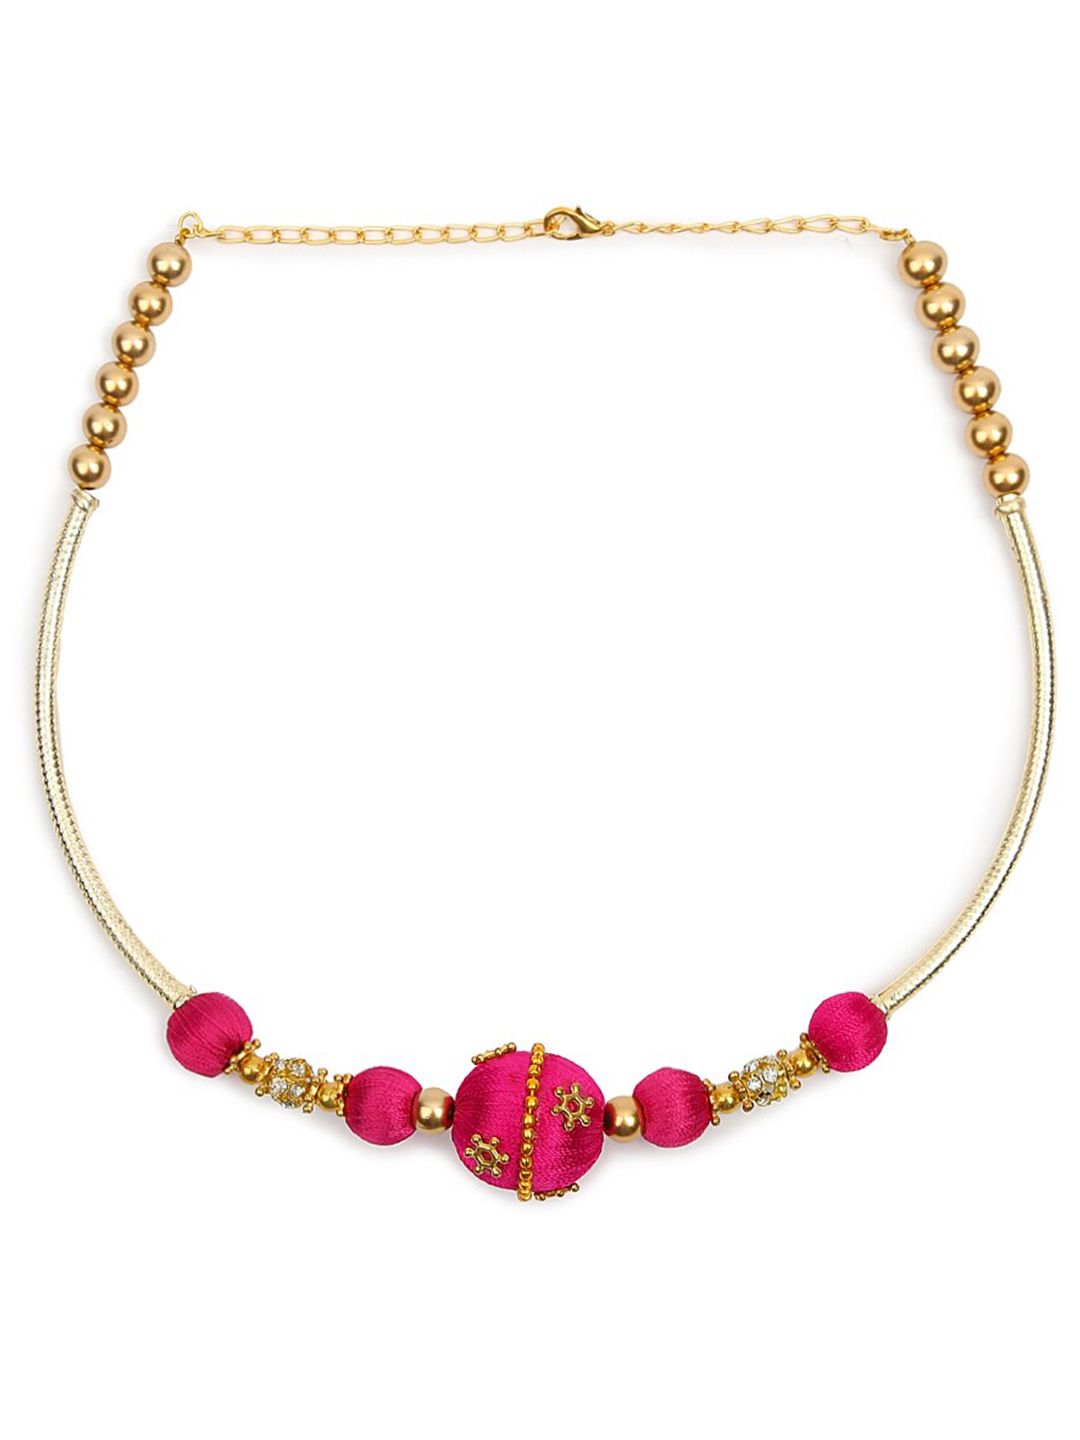 AKSHARA Pink & Gold-Toned Choker Necklace Price in India